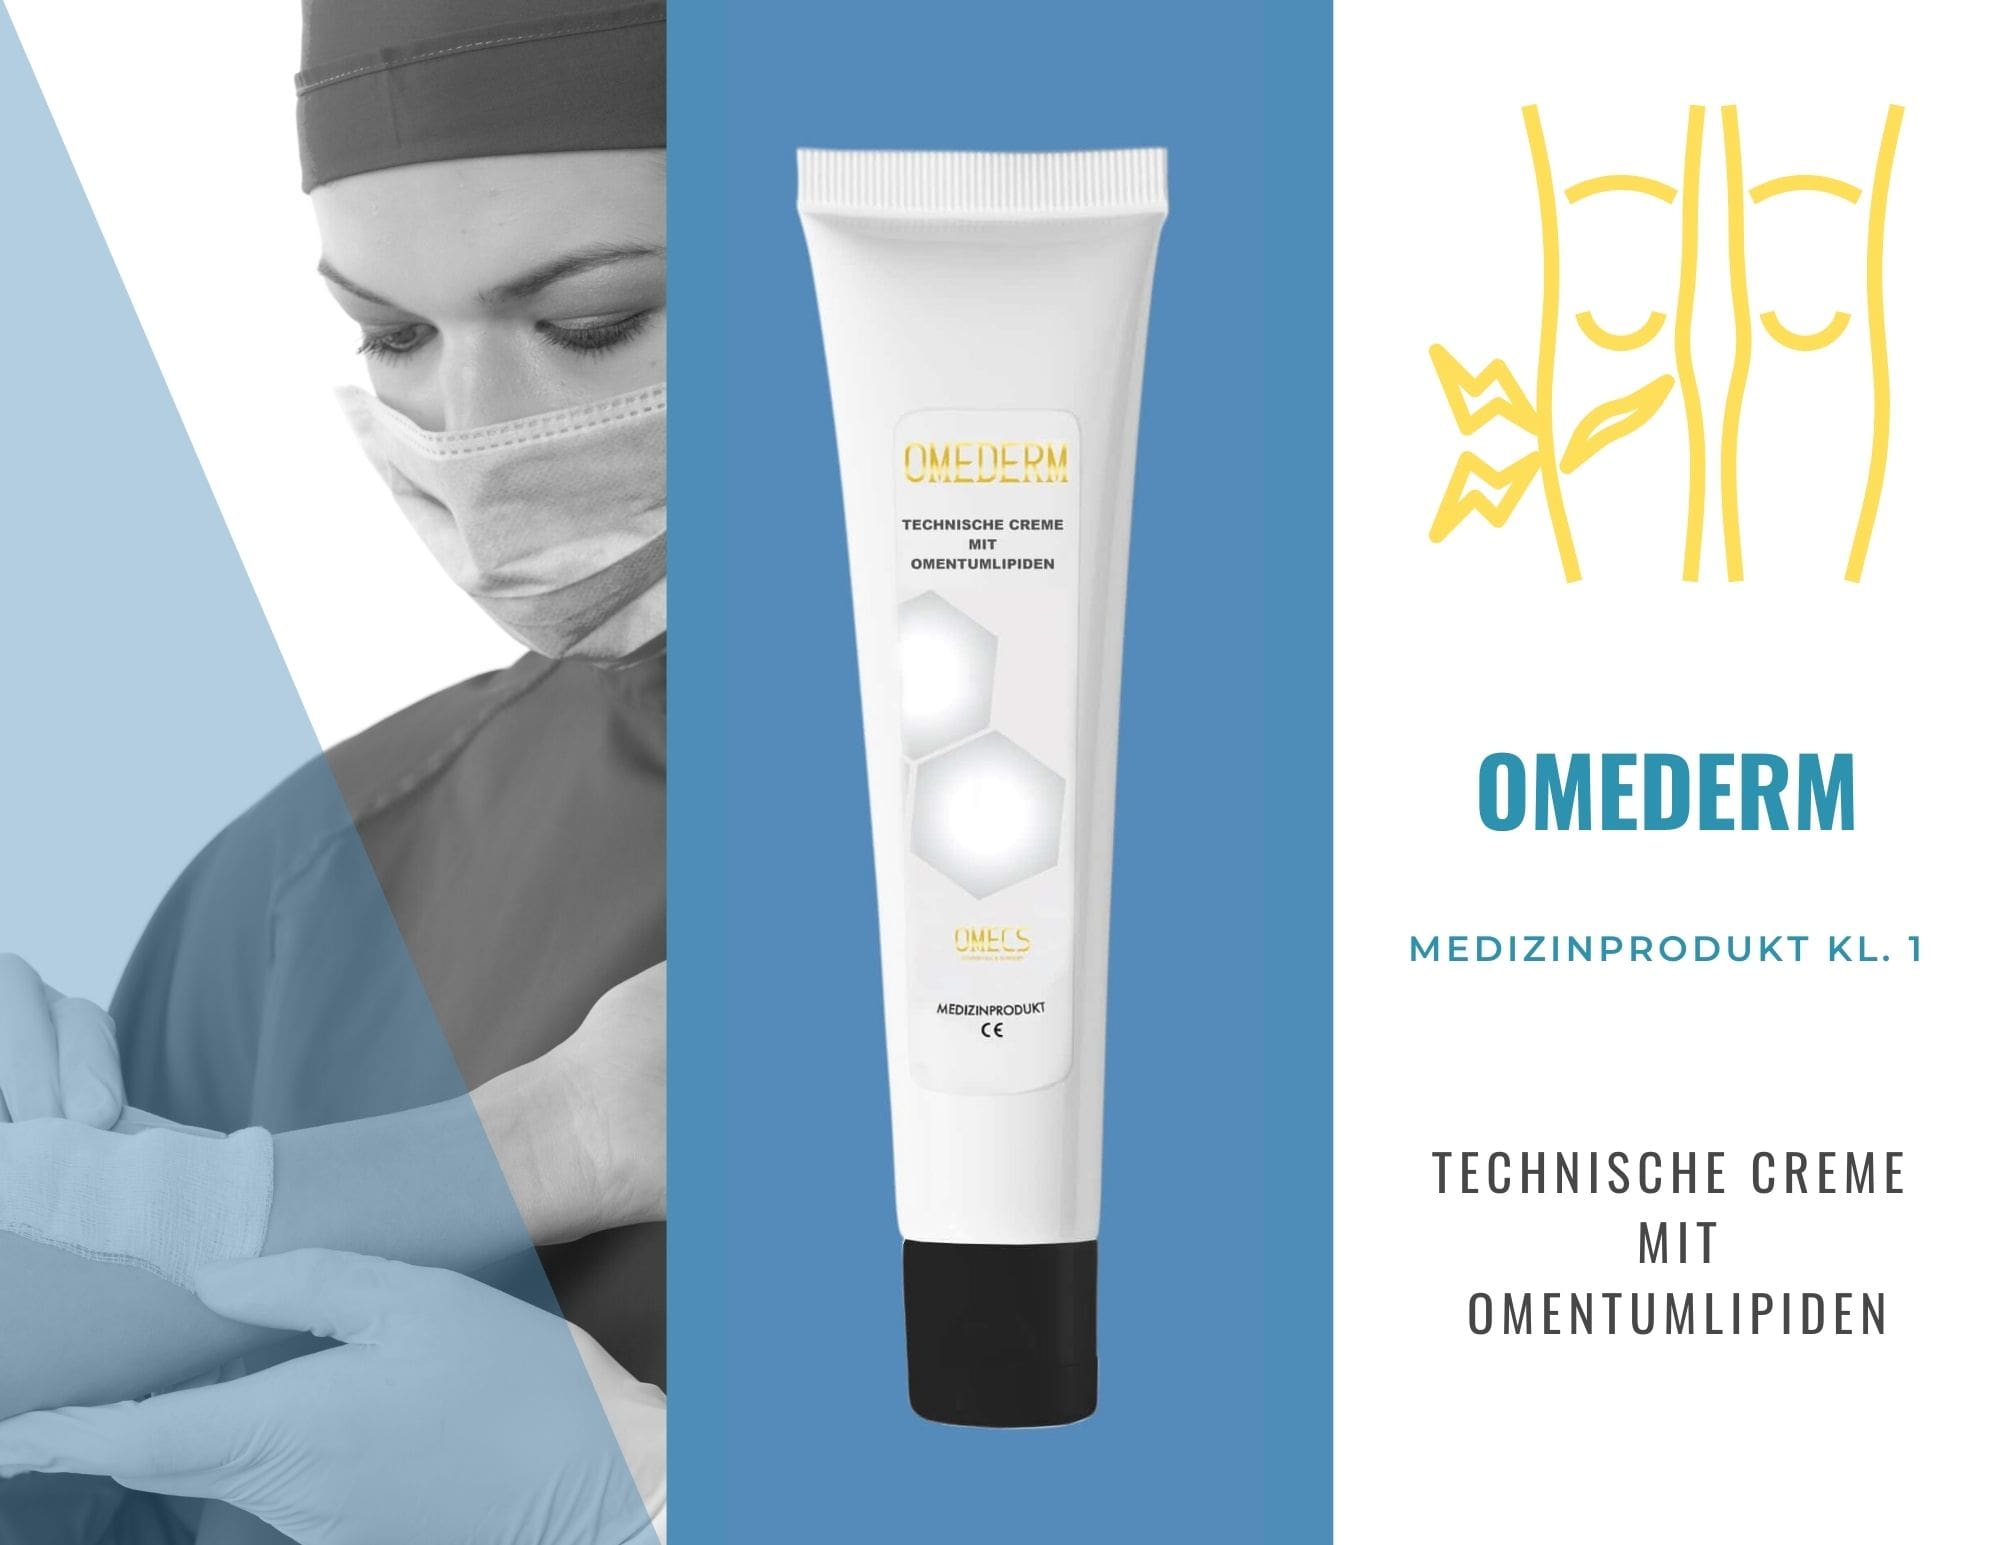 OMEDERM wound ointment